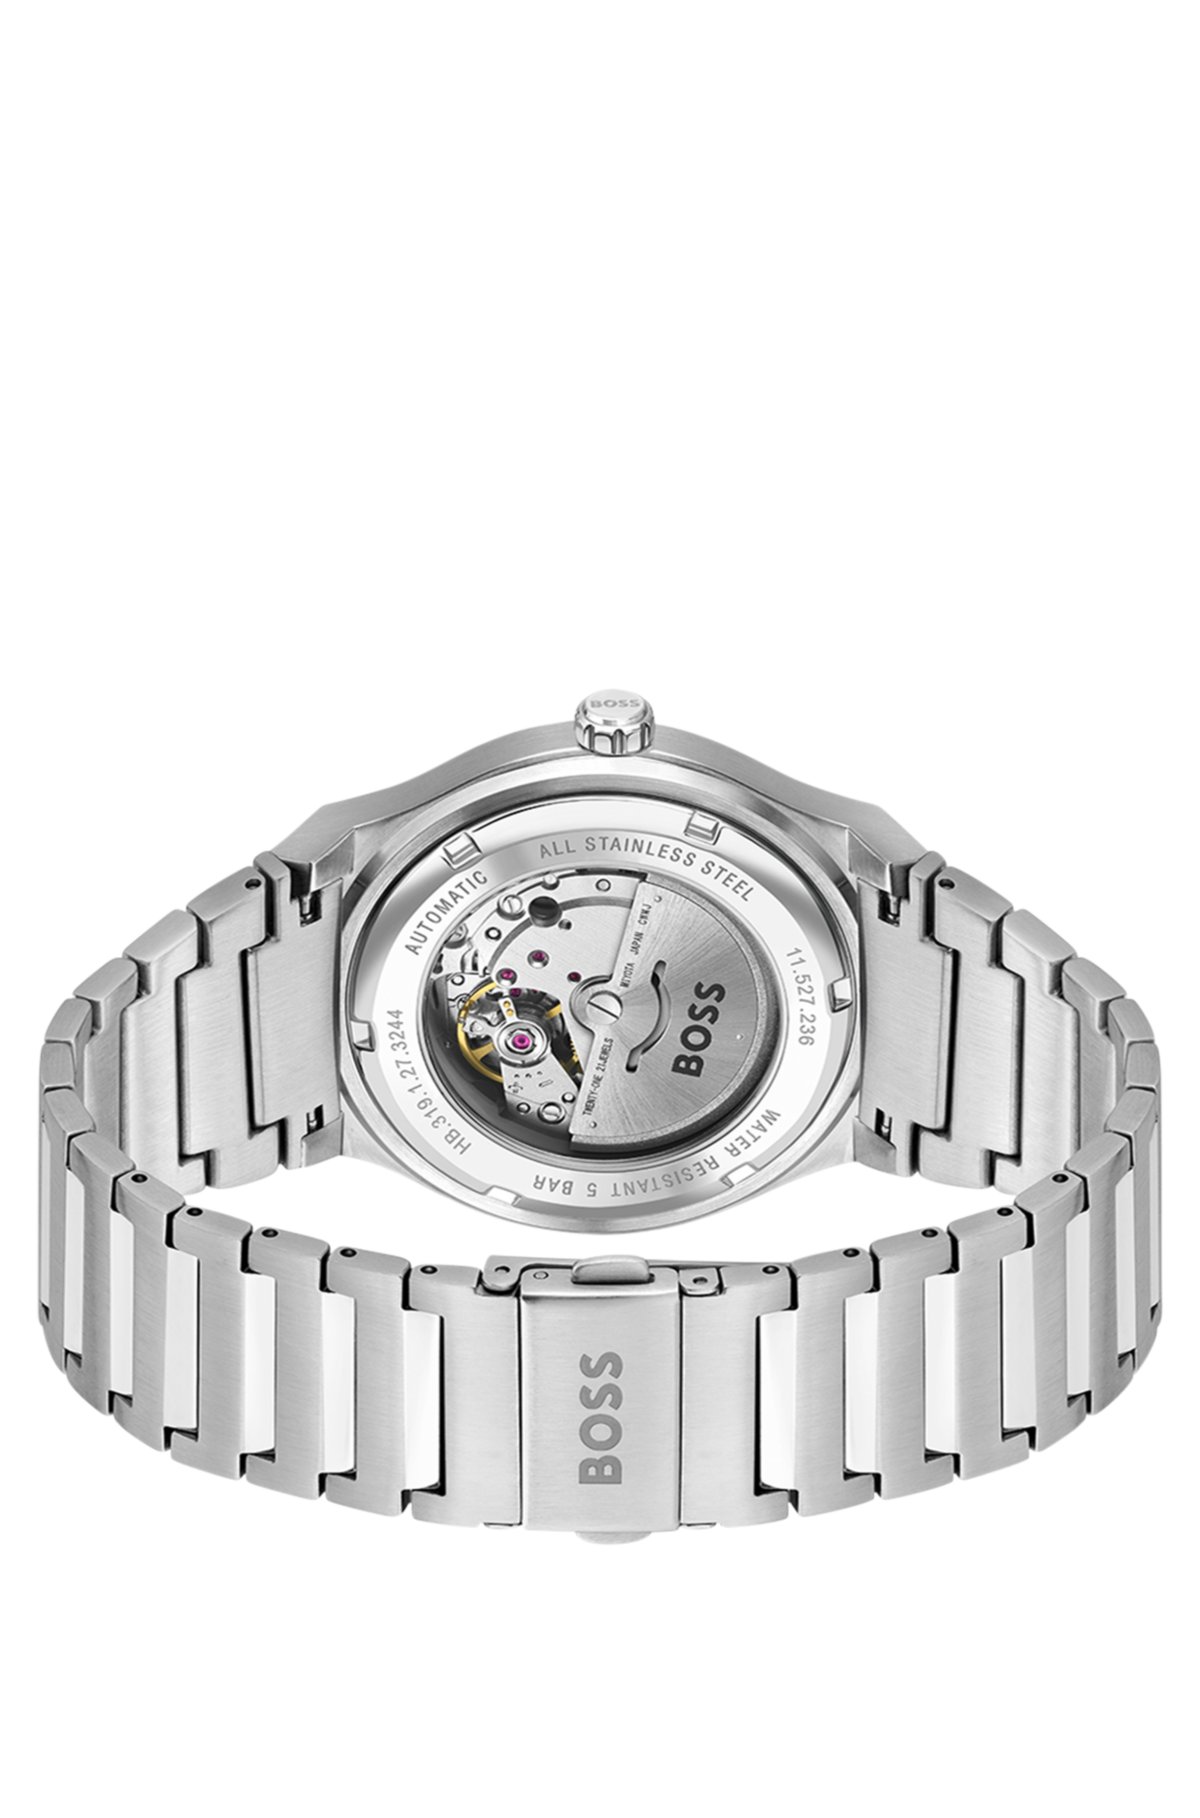 - BOSS automatic dial watch groove-textured Link-bracelet with